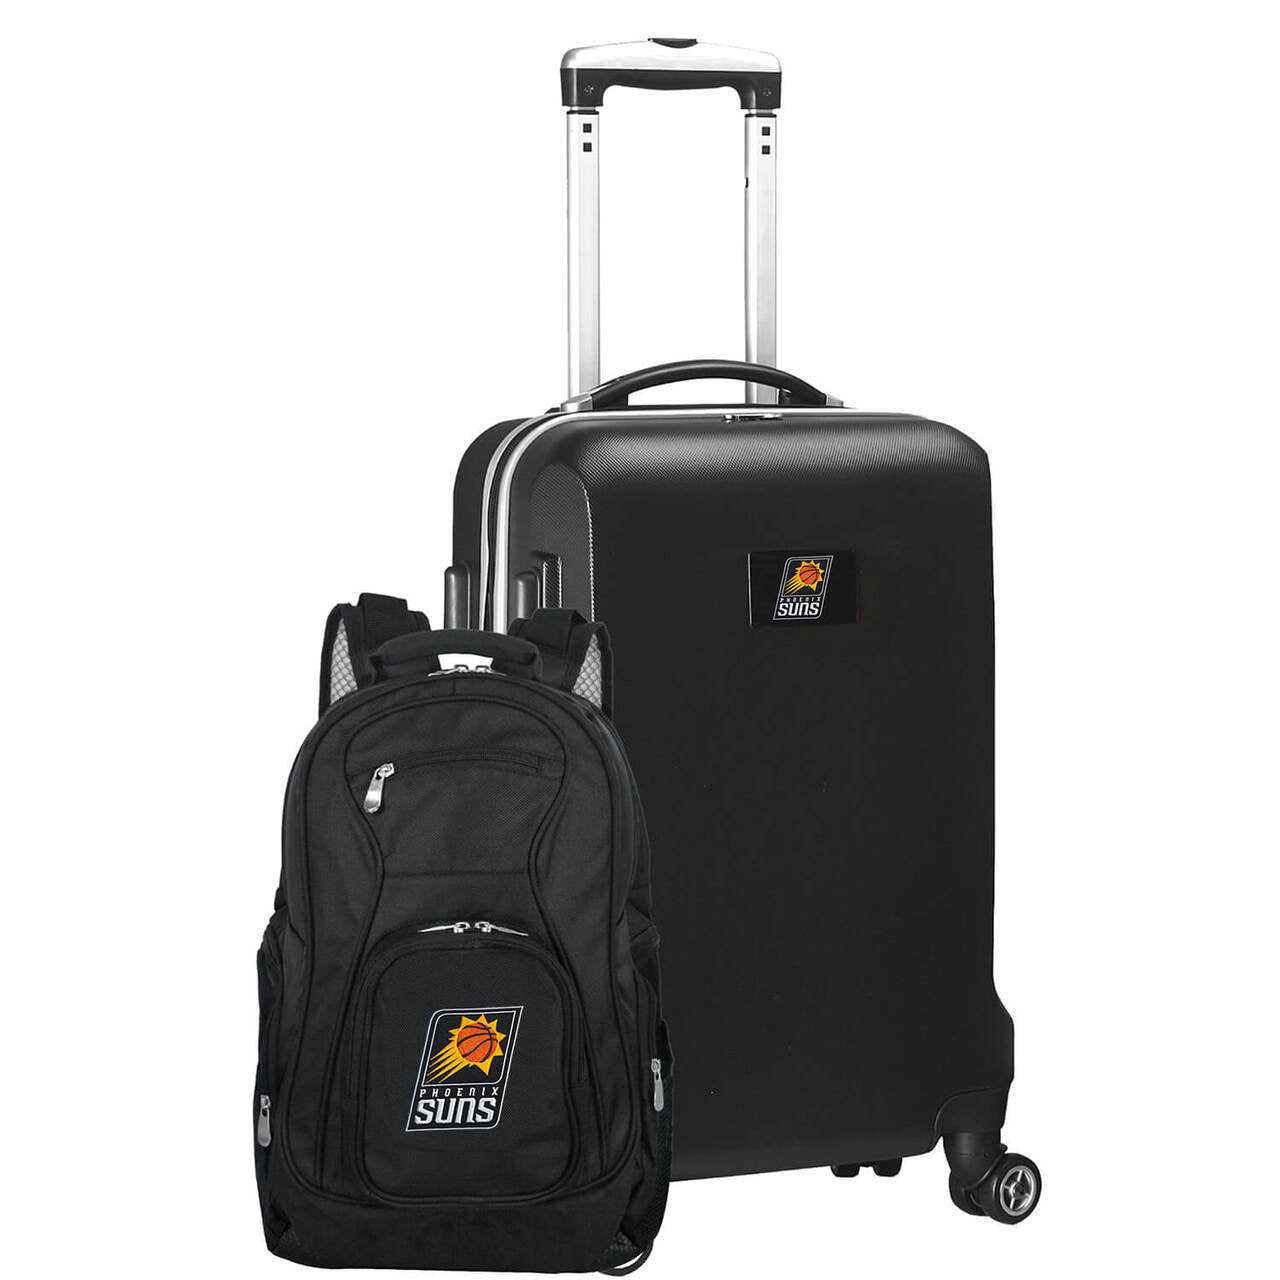 Phoenix Suns Deluxe 2-Piece Backpack and Carry on Set in Black